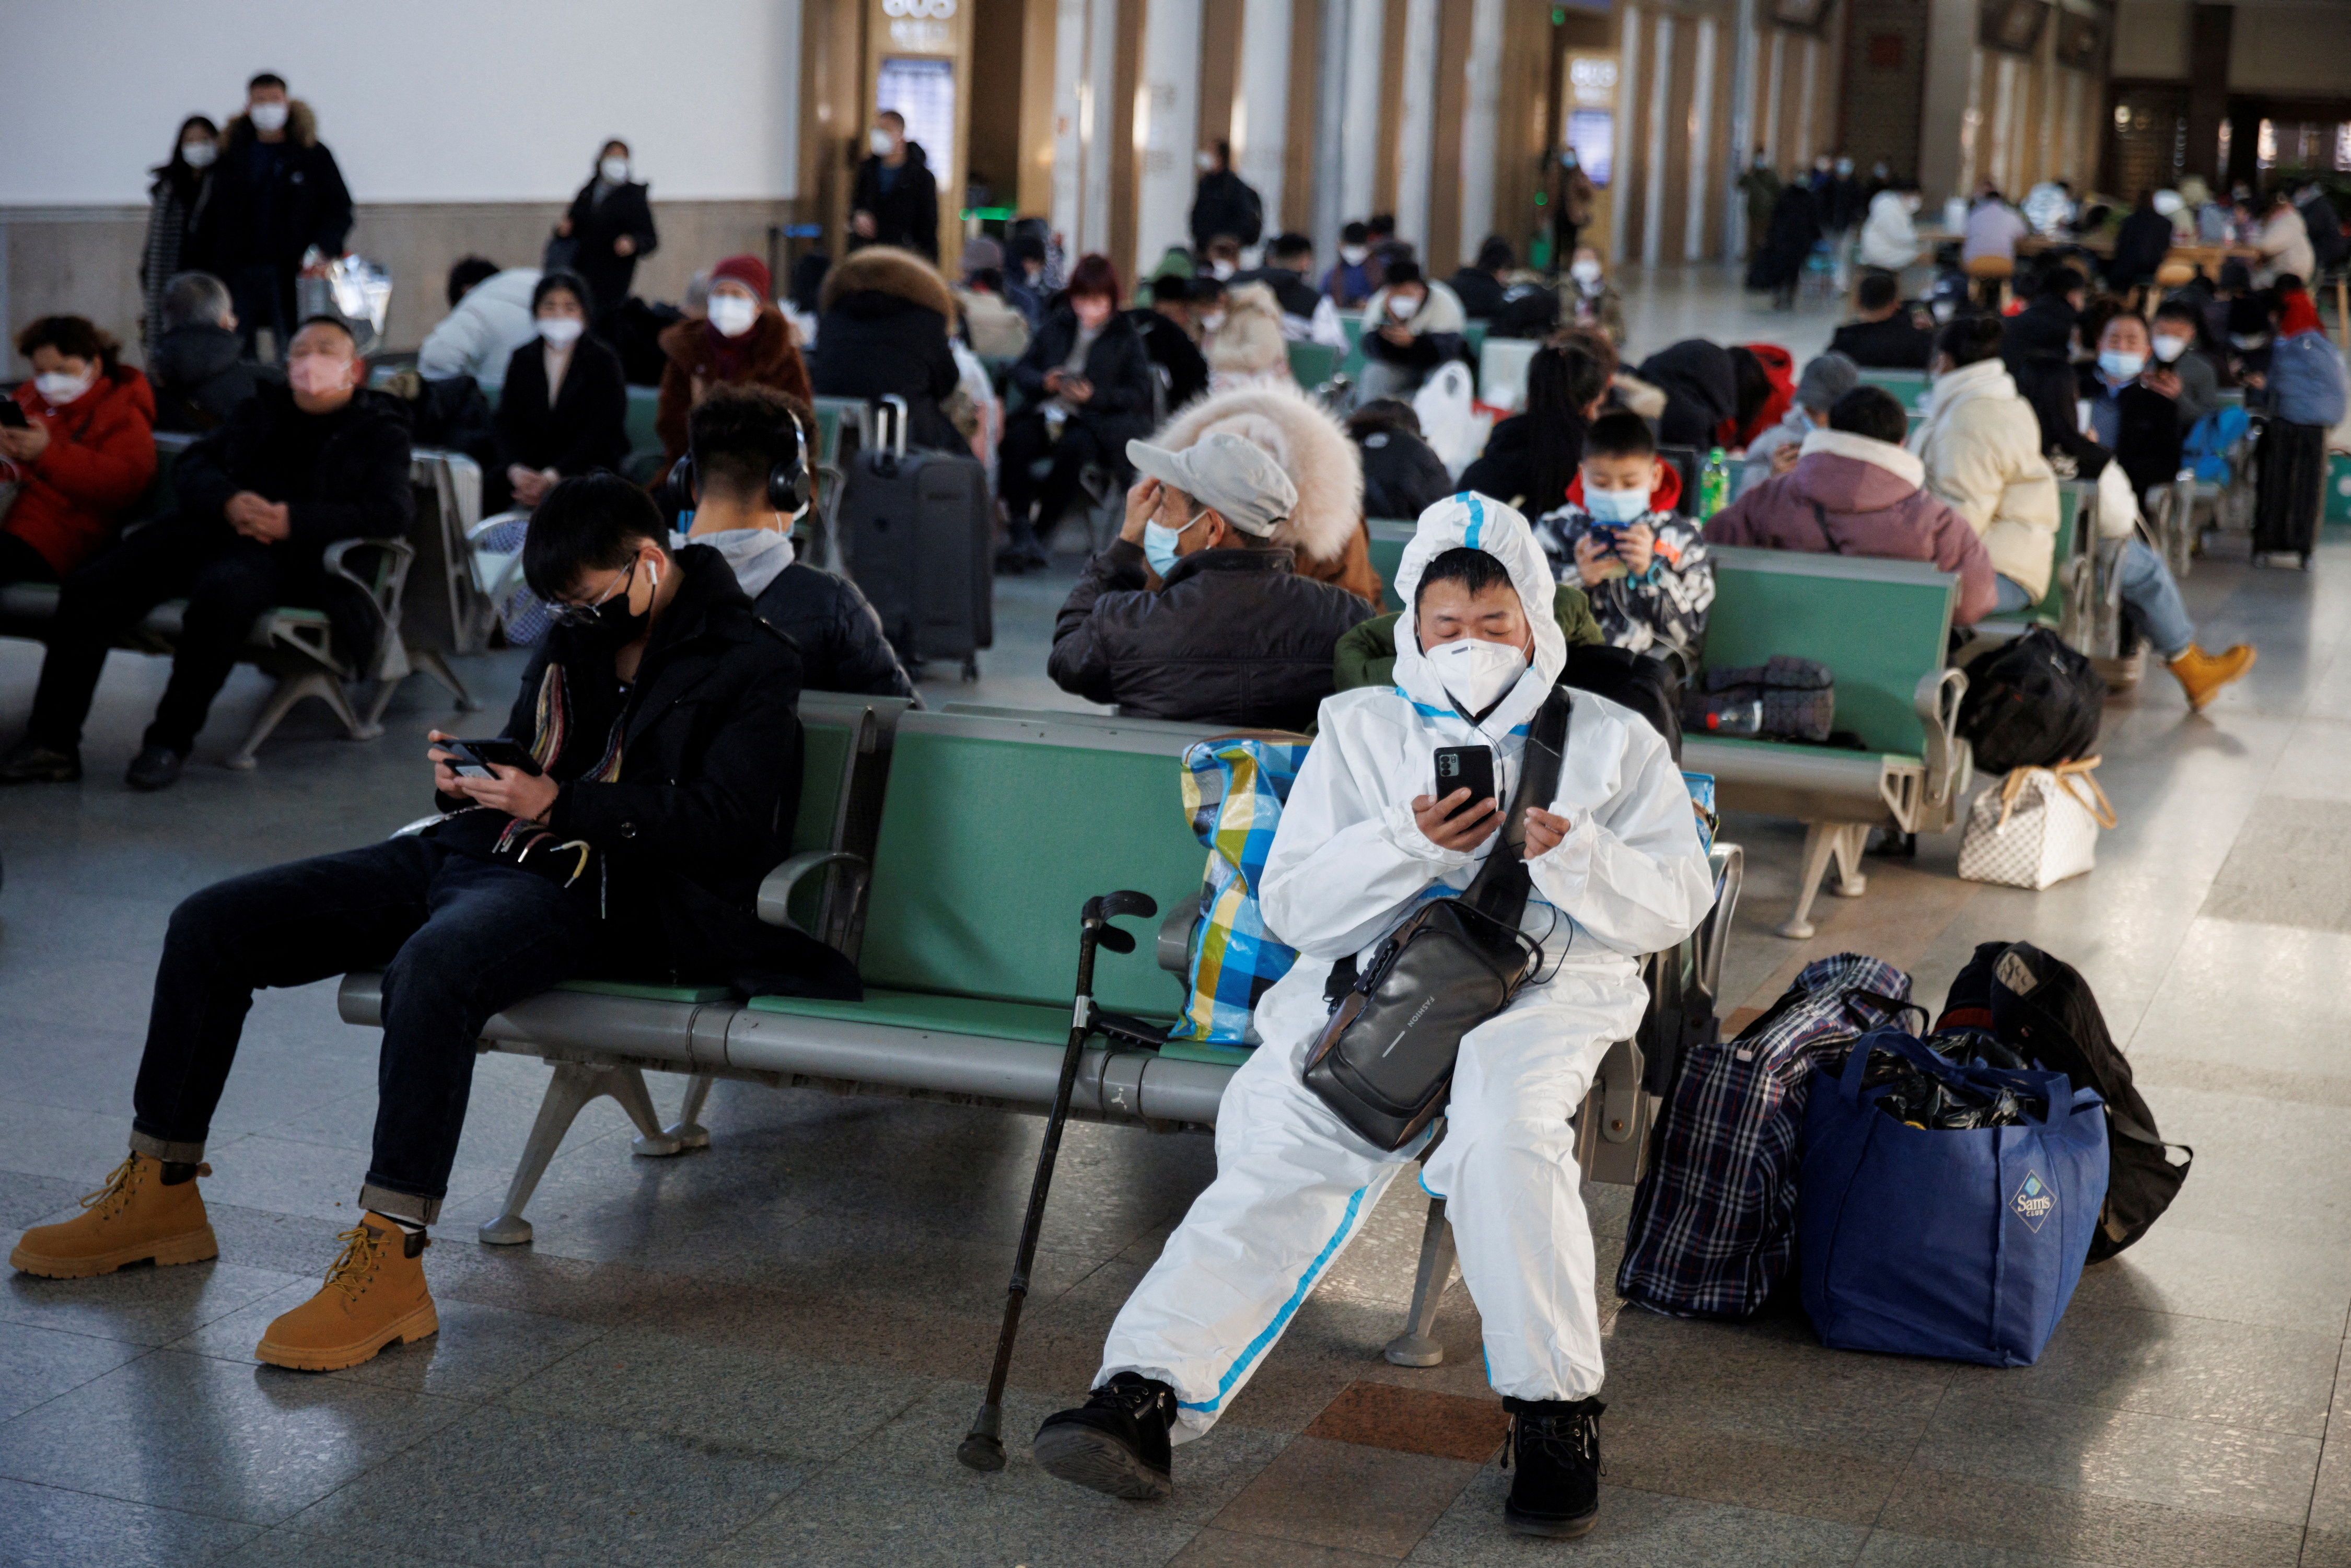 A person wearing a protective suit sits in Beijing Railway Station as passengers wait to board a train to travel for Spring Festival ahead of Chinese Lunar New Year festivities in Beijing